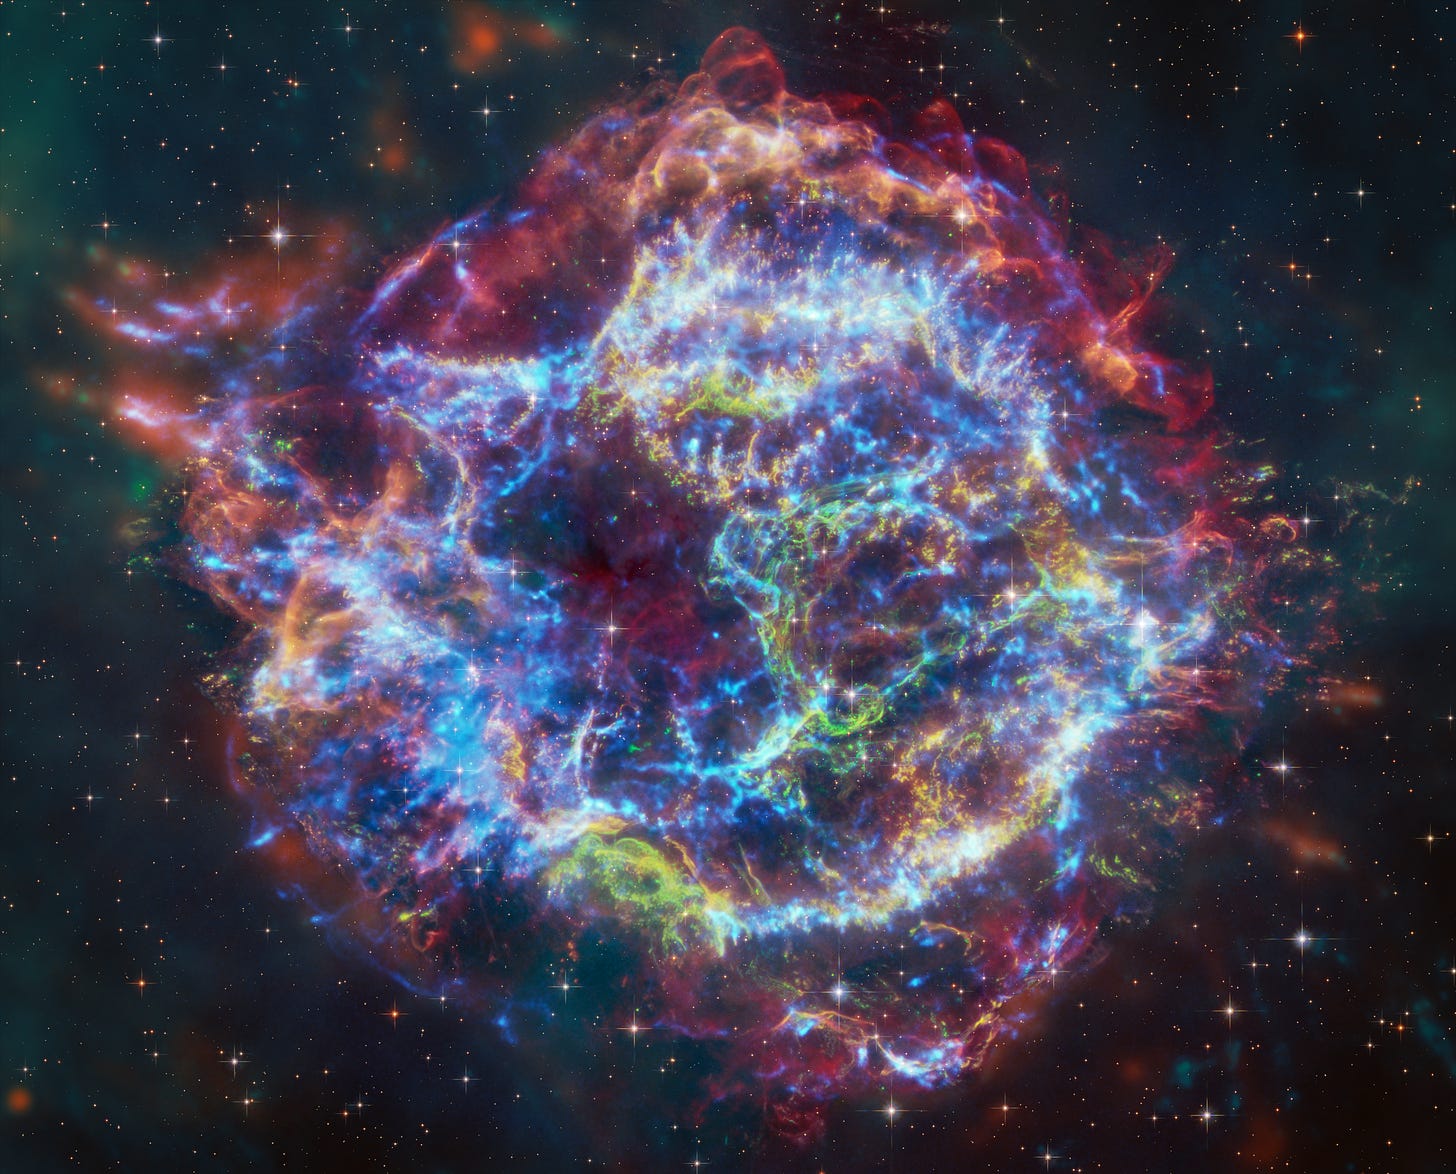 Data from Chandra and Webb of the supernova remnant Cassiopeia A (Cas A) have been combined for the first time, helping to explain an unusual structure within the debris field and address other questions about the supernova explosion that created it. These images show X-rays from Chandra, infrared data from Webb and Spitzer, and optical data from Hubble. Astronomers using these data found that the so-called Green Monster near the center of Cas A was created by a blast wave from the exploded star slamming into material surrounding it.